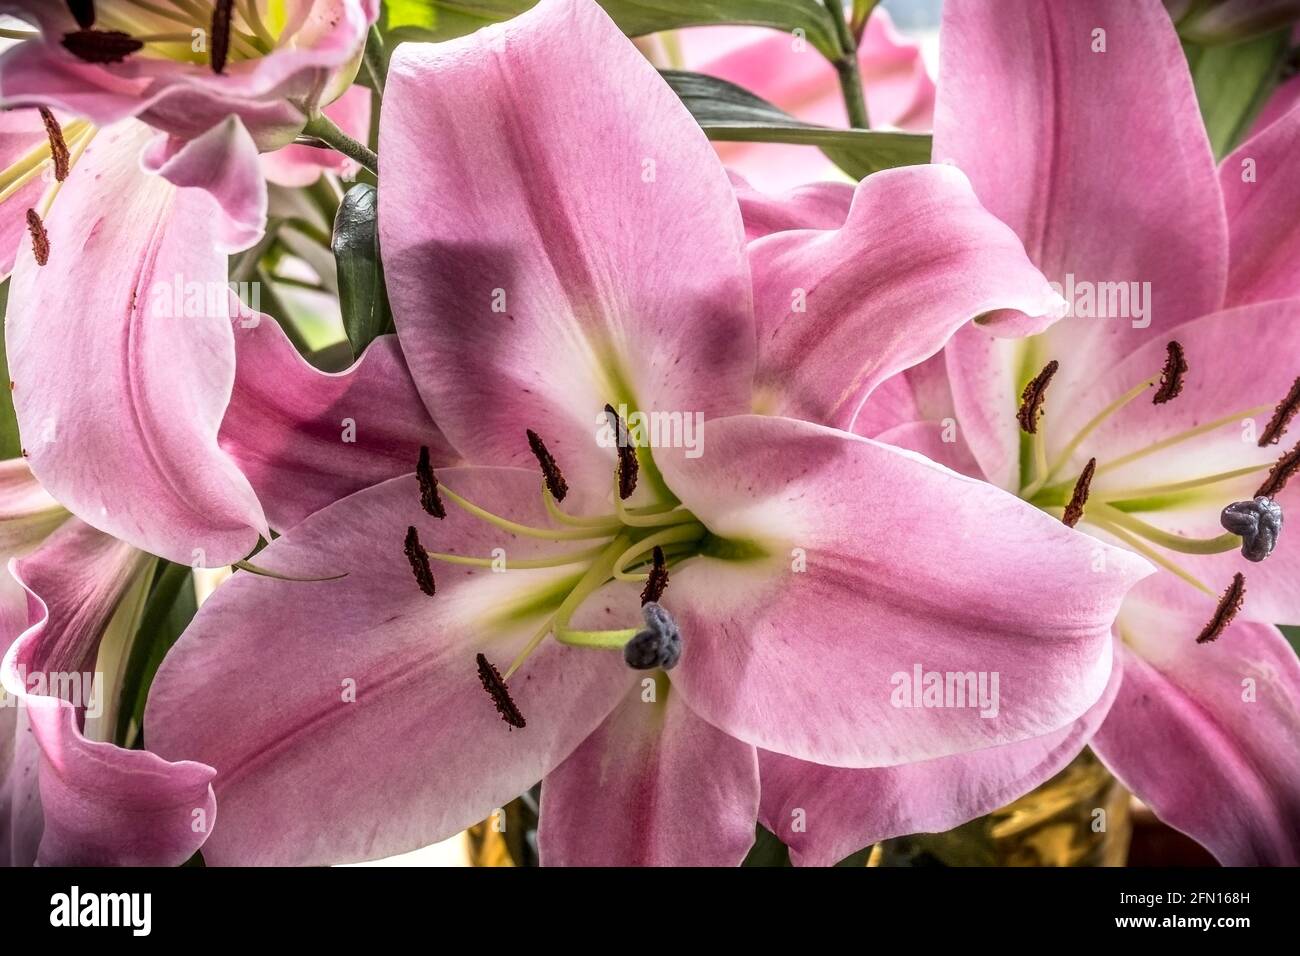 Closeup of the parts of a Lily flower Lillium. Stock Photo